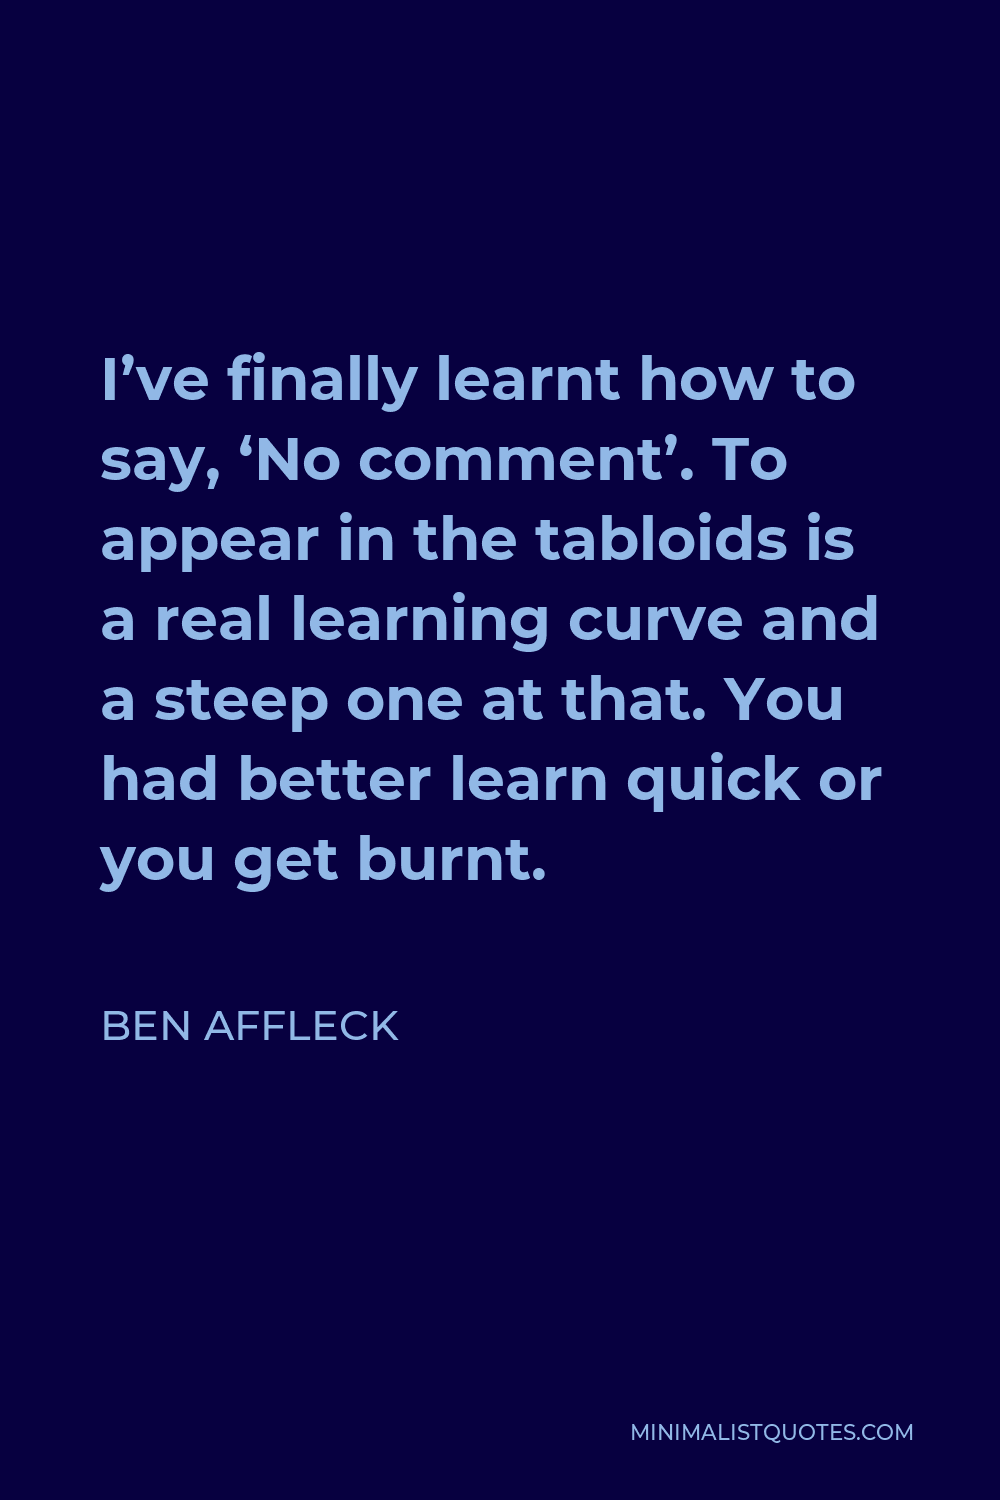 Ben Affleck Quote - I’ve finally learnt how to say, ‘No comment’. To appear in the tabloids is a real learning curve and a steep one at that. You had better learn quick or you get burnt.